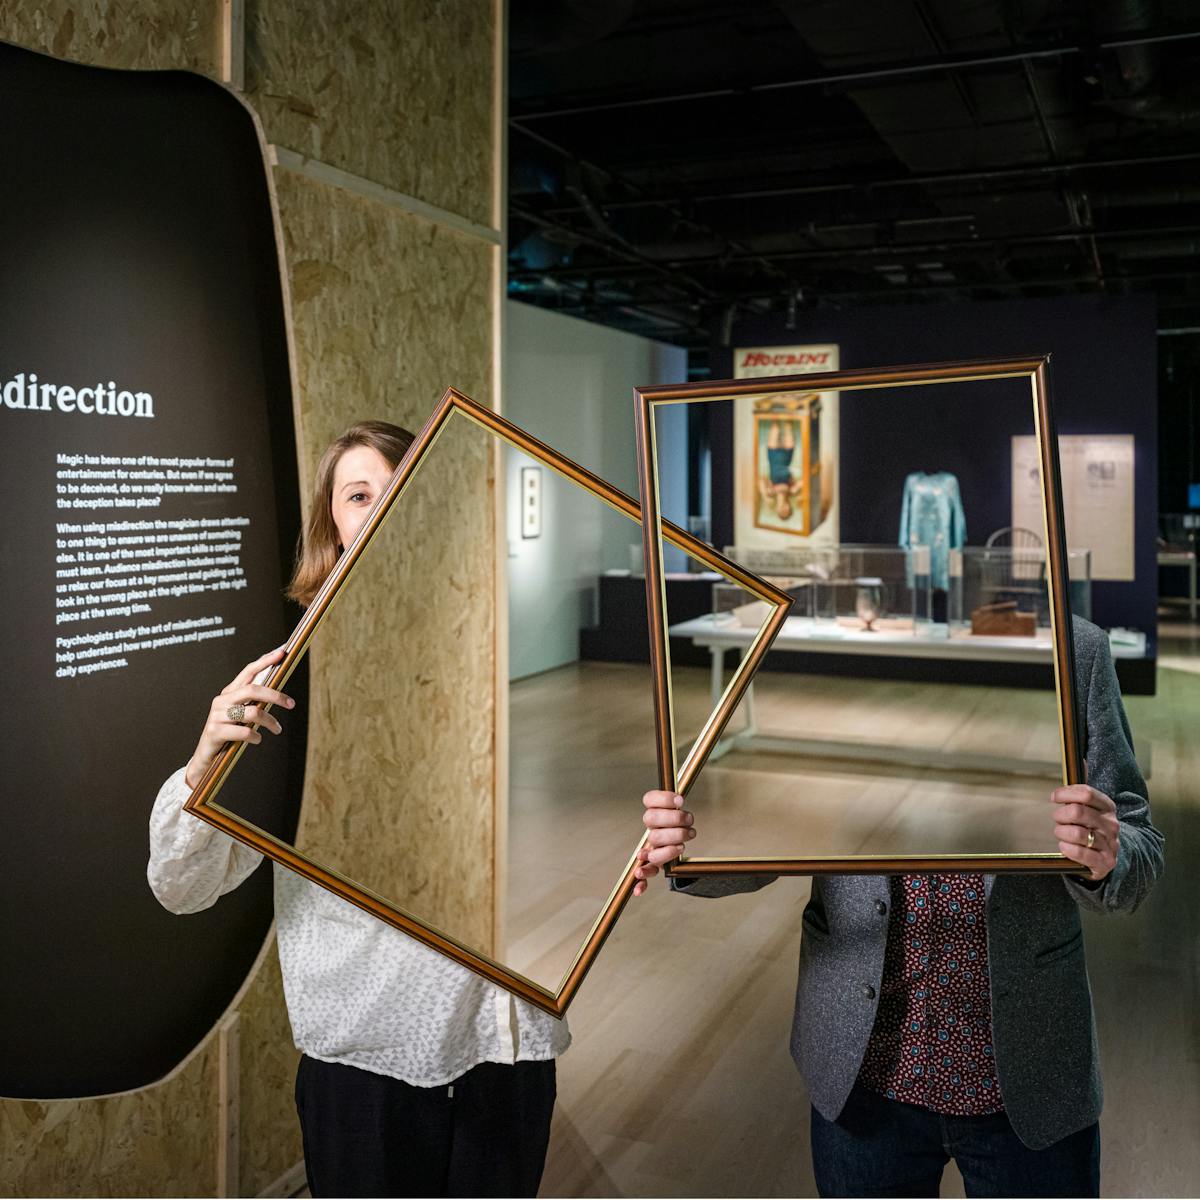 Photograph of a woman and a man in a dark gallery space holding up picture frames in front of their bodies and parts of their faces. Within the picture frame you can see straight through them, as if their bodies and faces have disappeared. In the background you can see a large historical poster and exhibitor display cases. On the left is a text panel titled, "Misdirection".